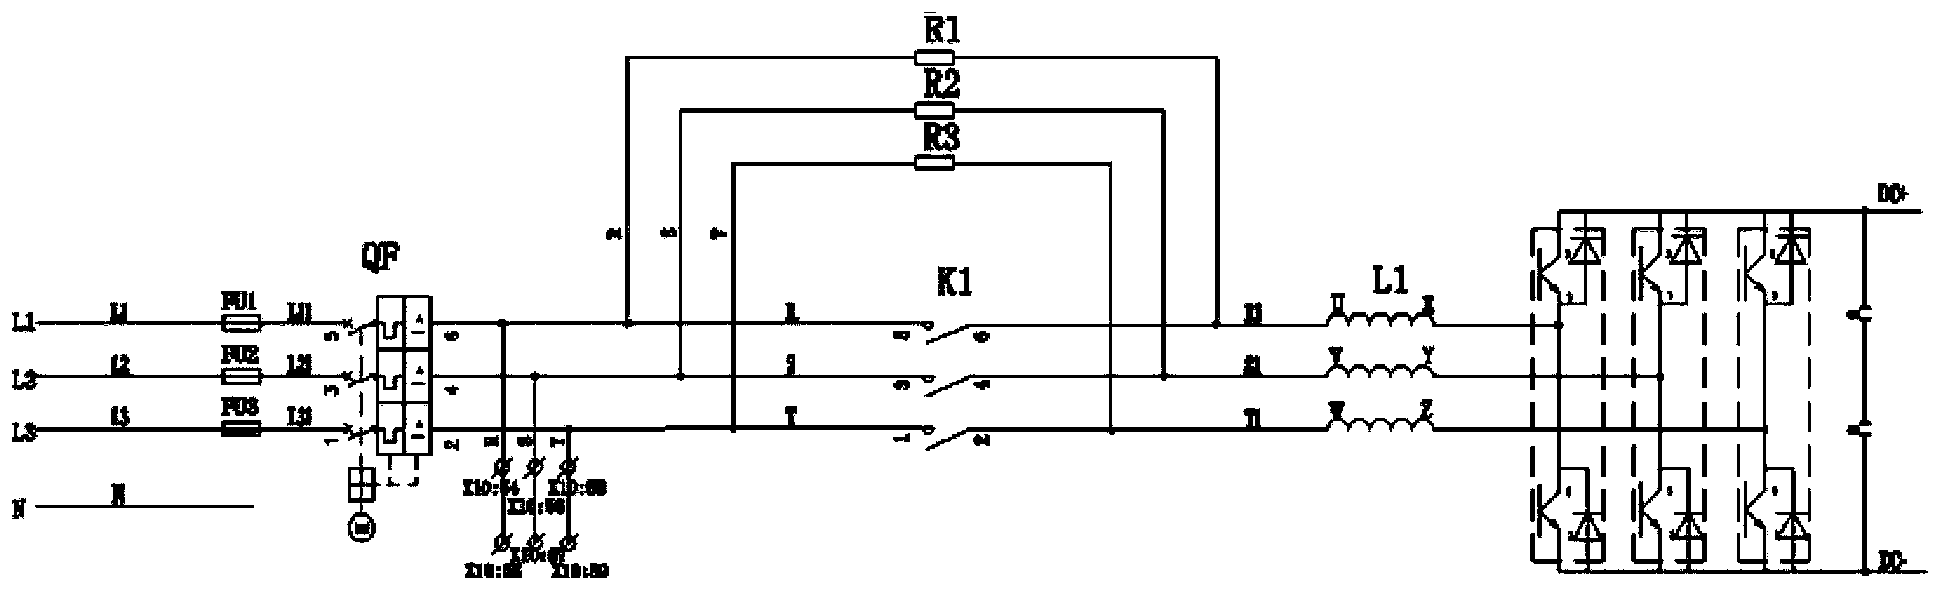 Multi-motor-driving frequency-converting energy-saving device based on common DC bus and pumping unit